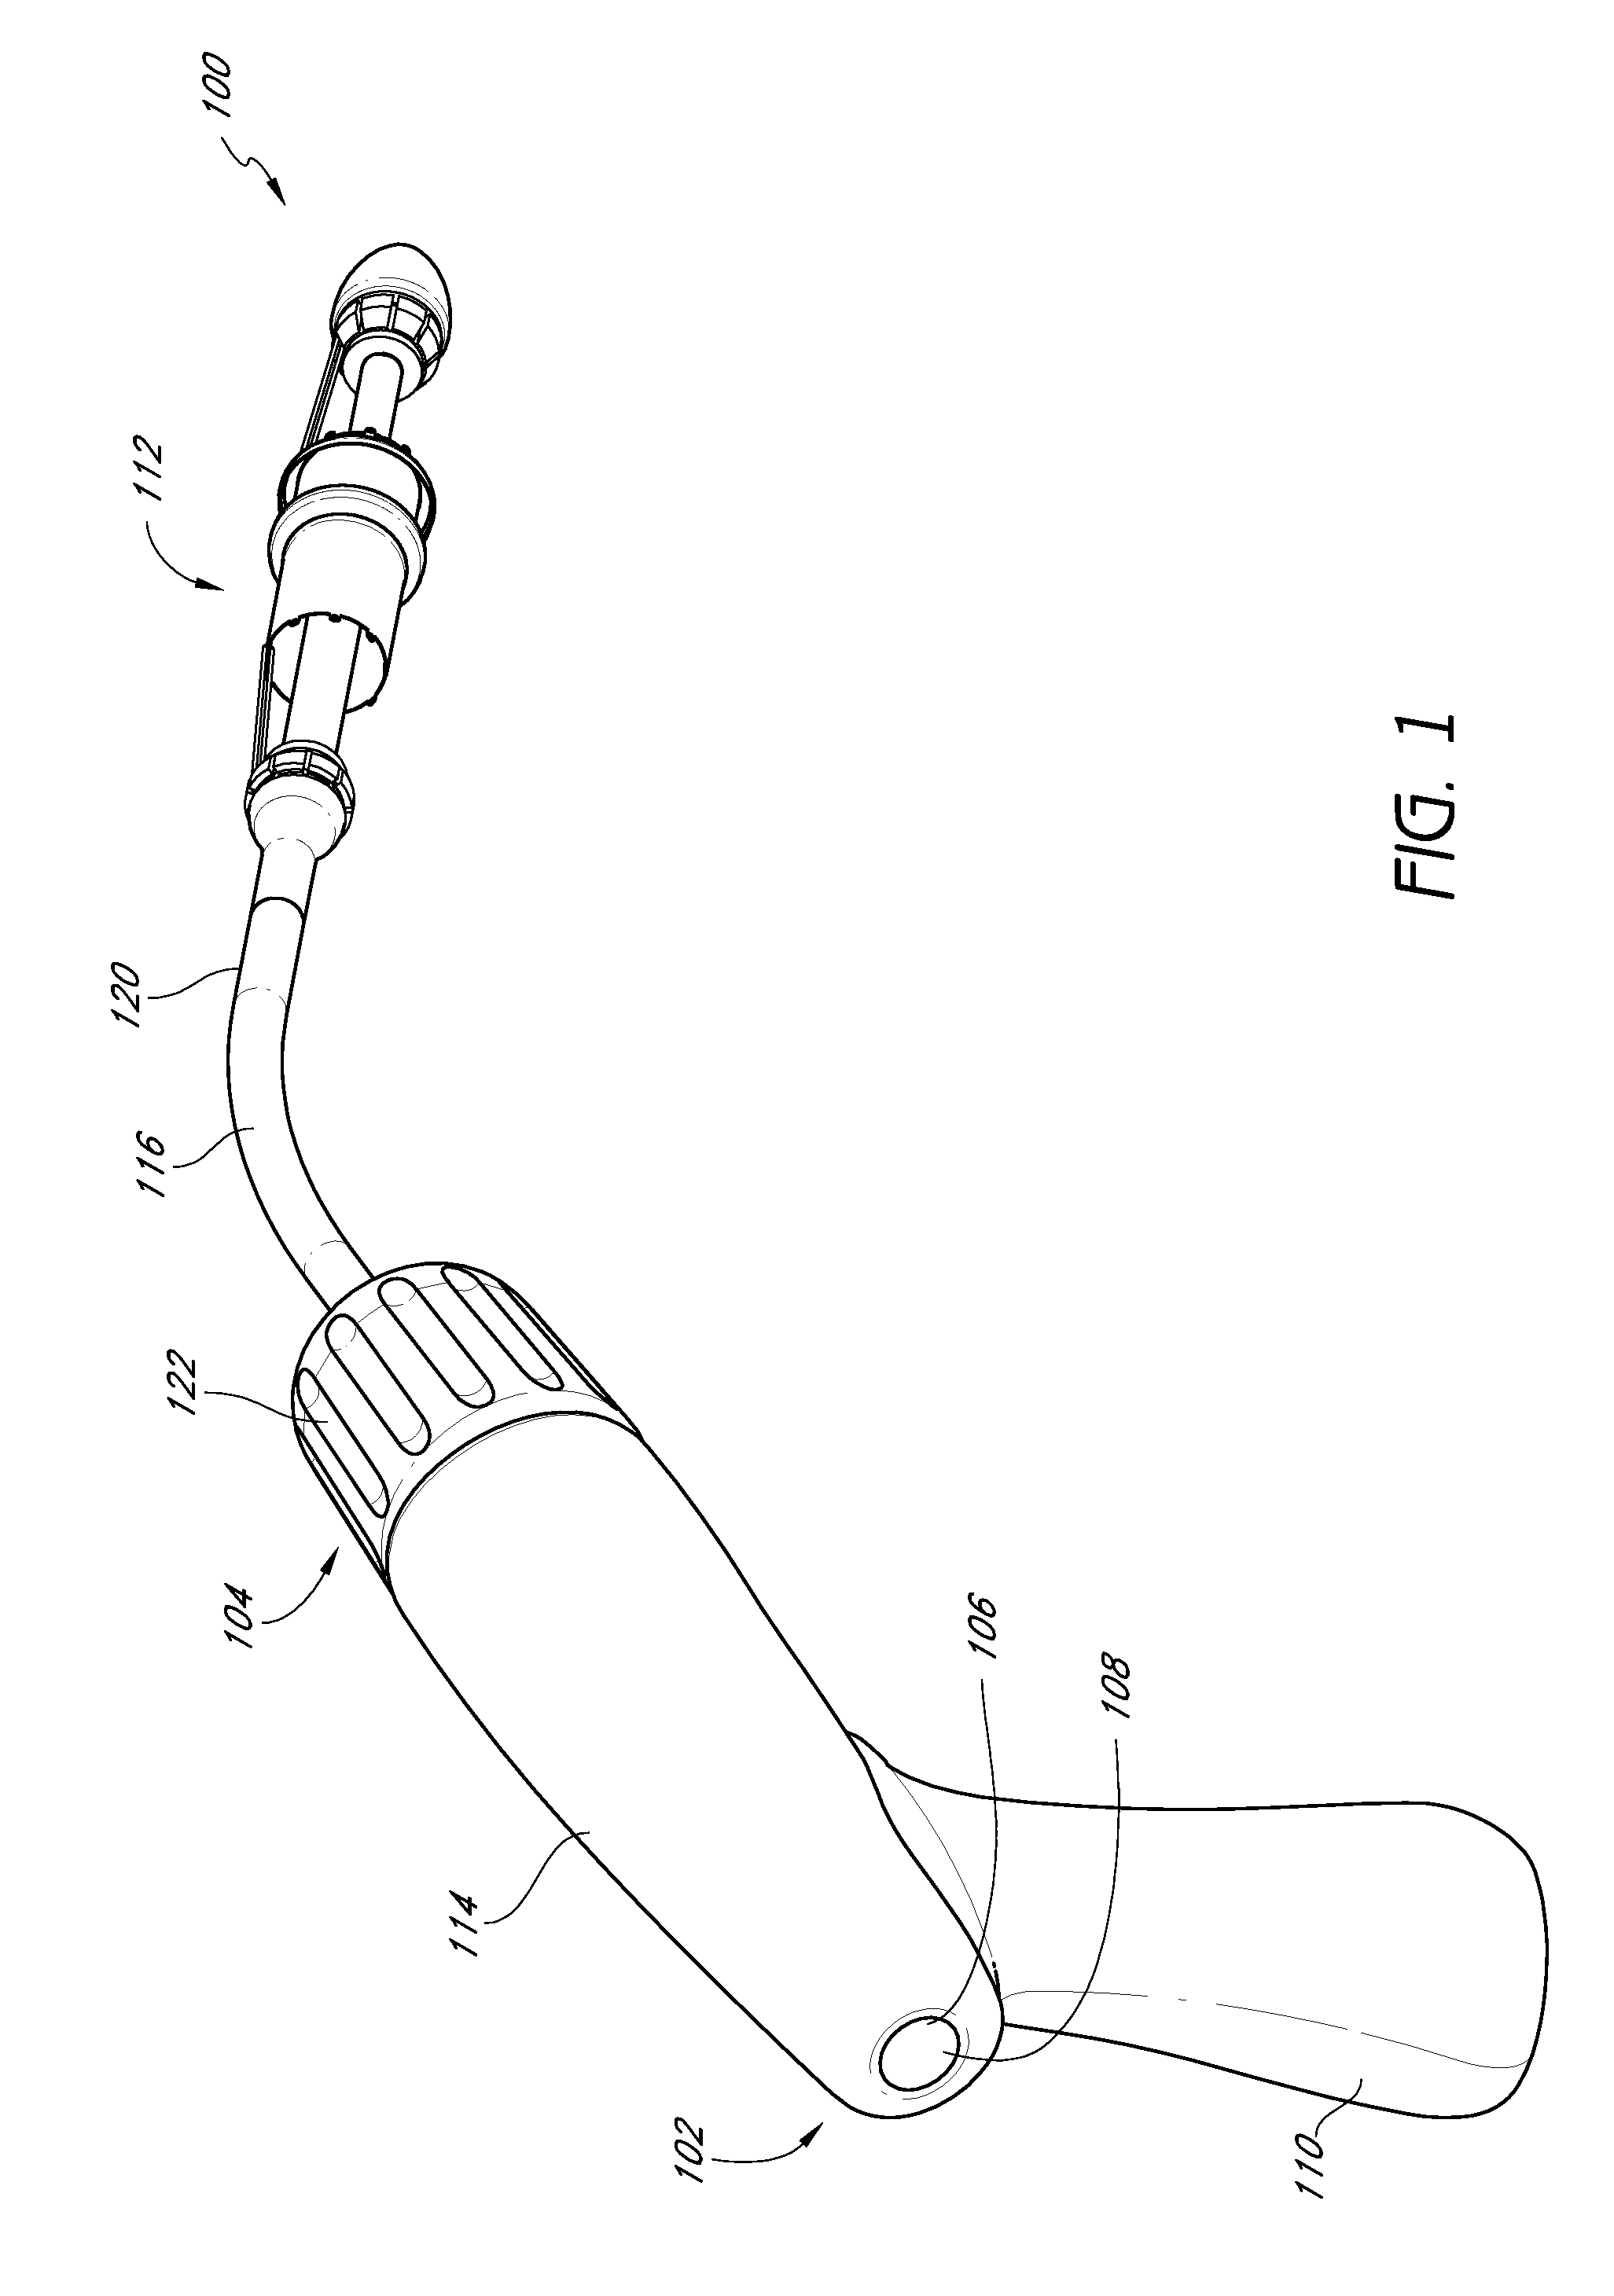 Delivery system for vascular implant